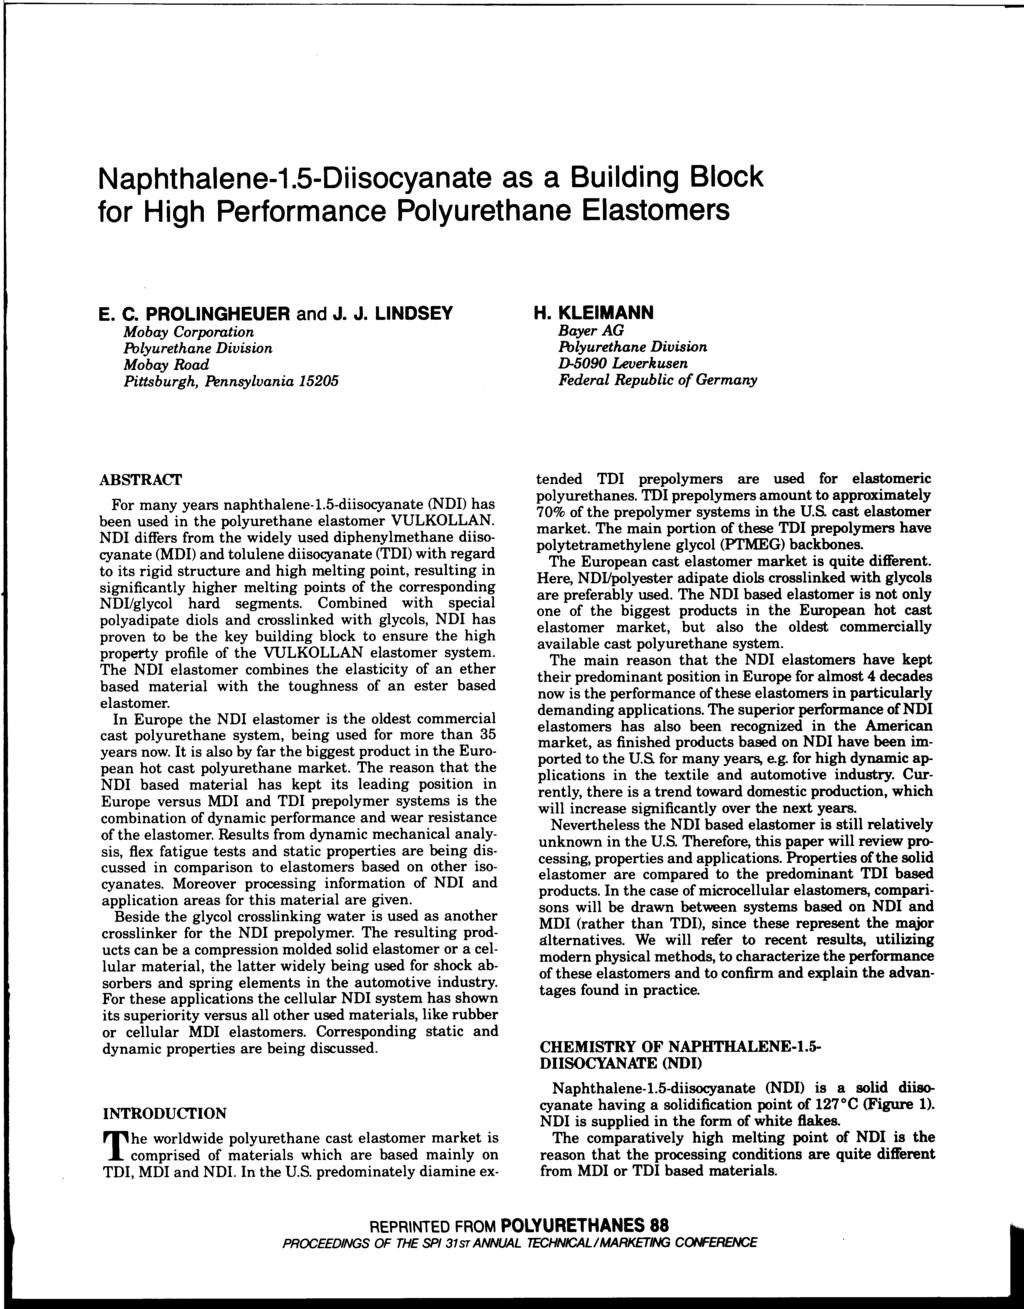 Naphthalene-1.5-Diisocyanate as a Building Block for High Performance Polyurethane Elastomers C. PROLINGHEUER and J.